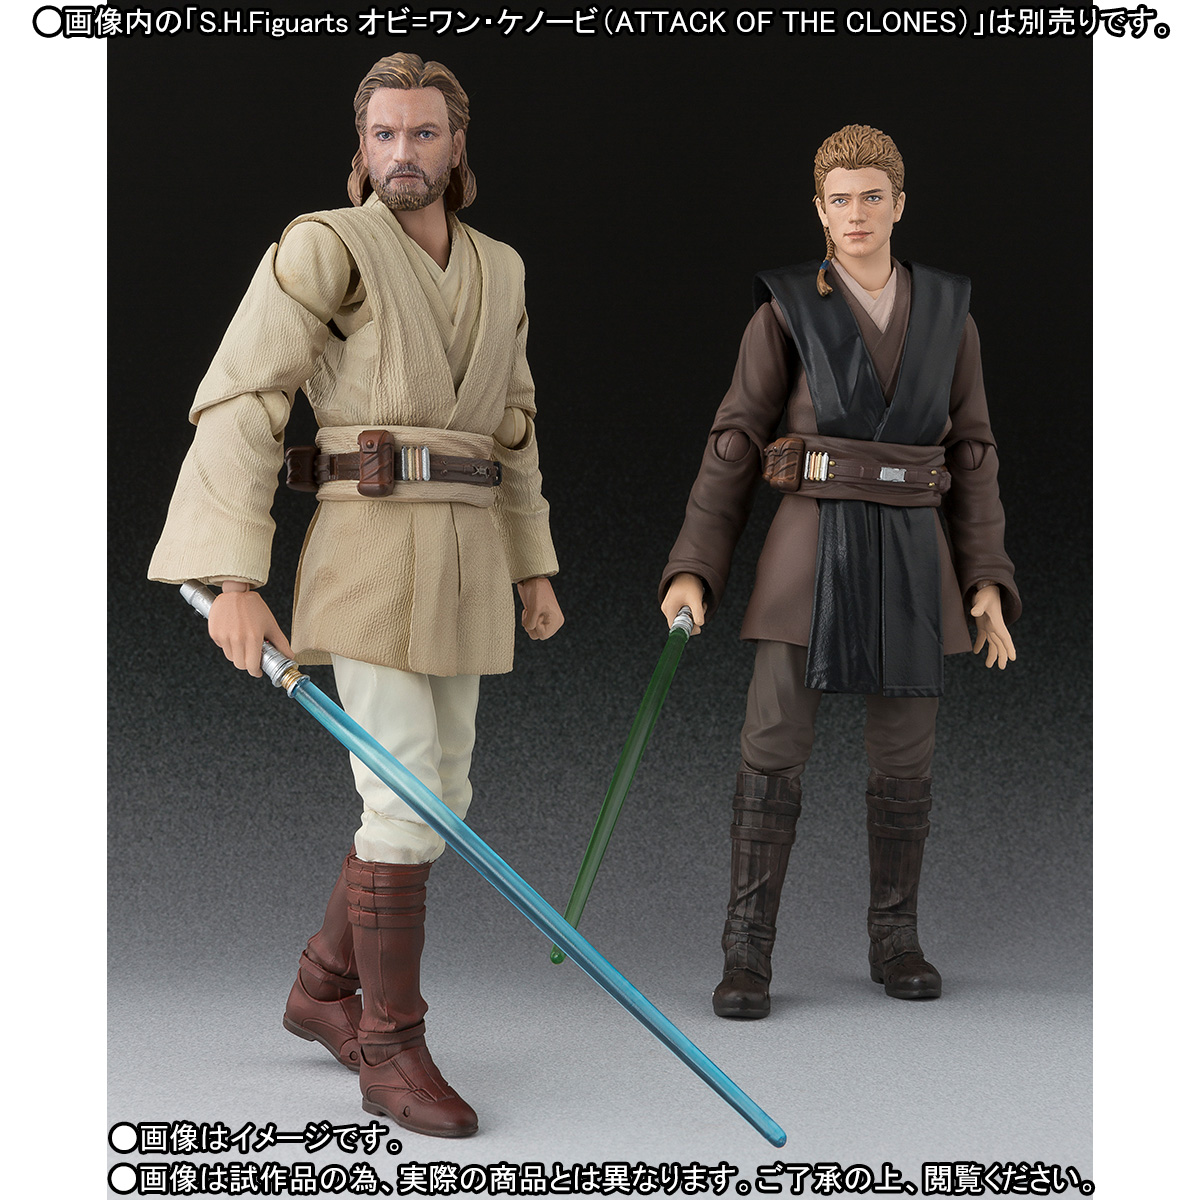 S.H.Figuarts Star Wars Attack of the Clones ANAKIN SKYWALKER with Bonus Parts 